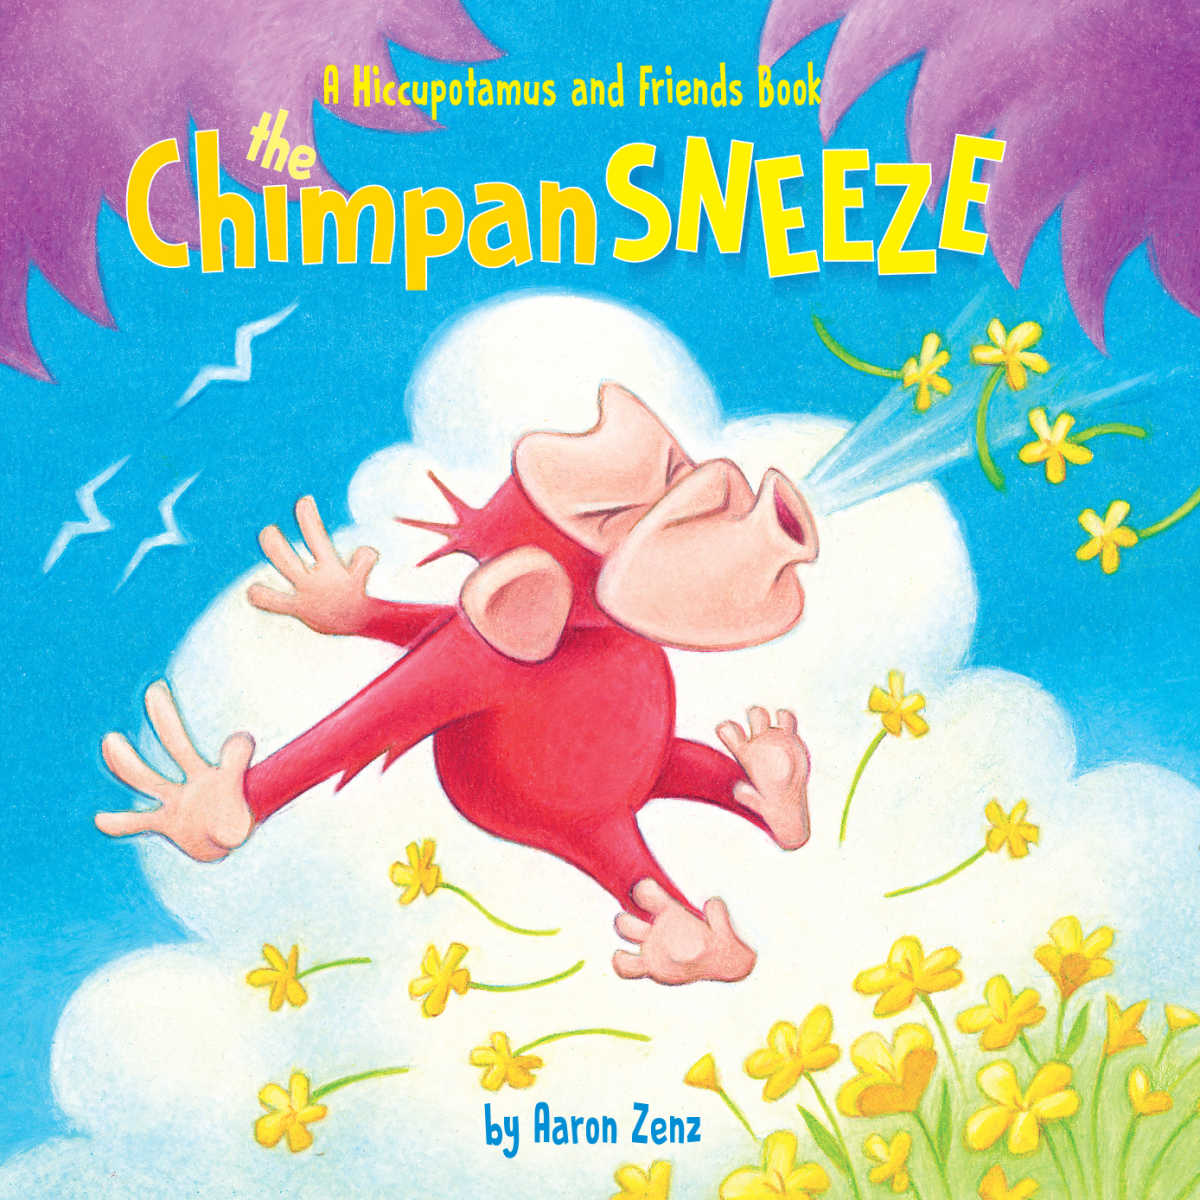 The Chimpansneeze is a delightful story that is both written and illustrated by the talented Aaron Zenz. His passion for storytelling and his ability to capture the essence of friendship shines through in every page.